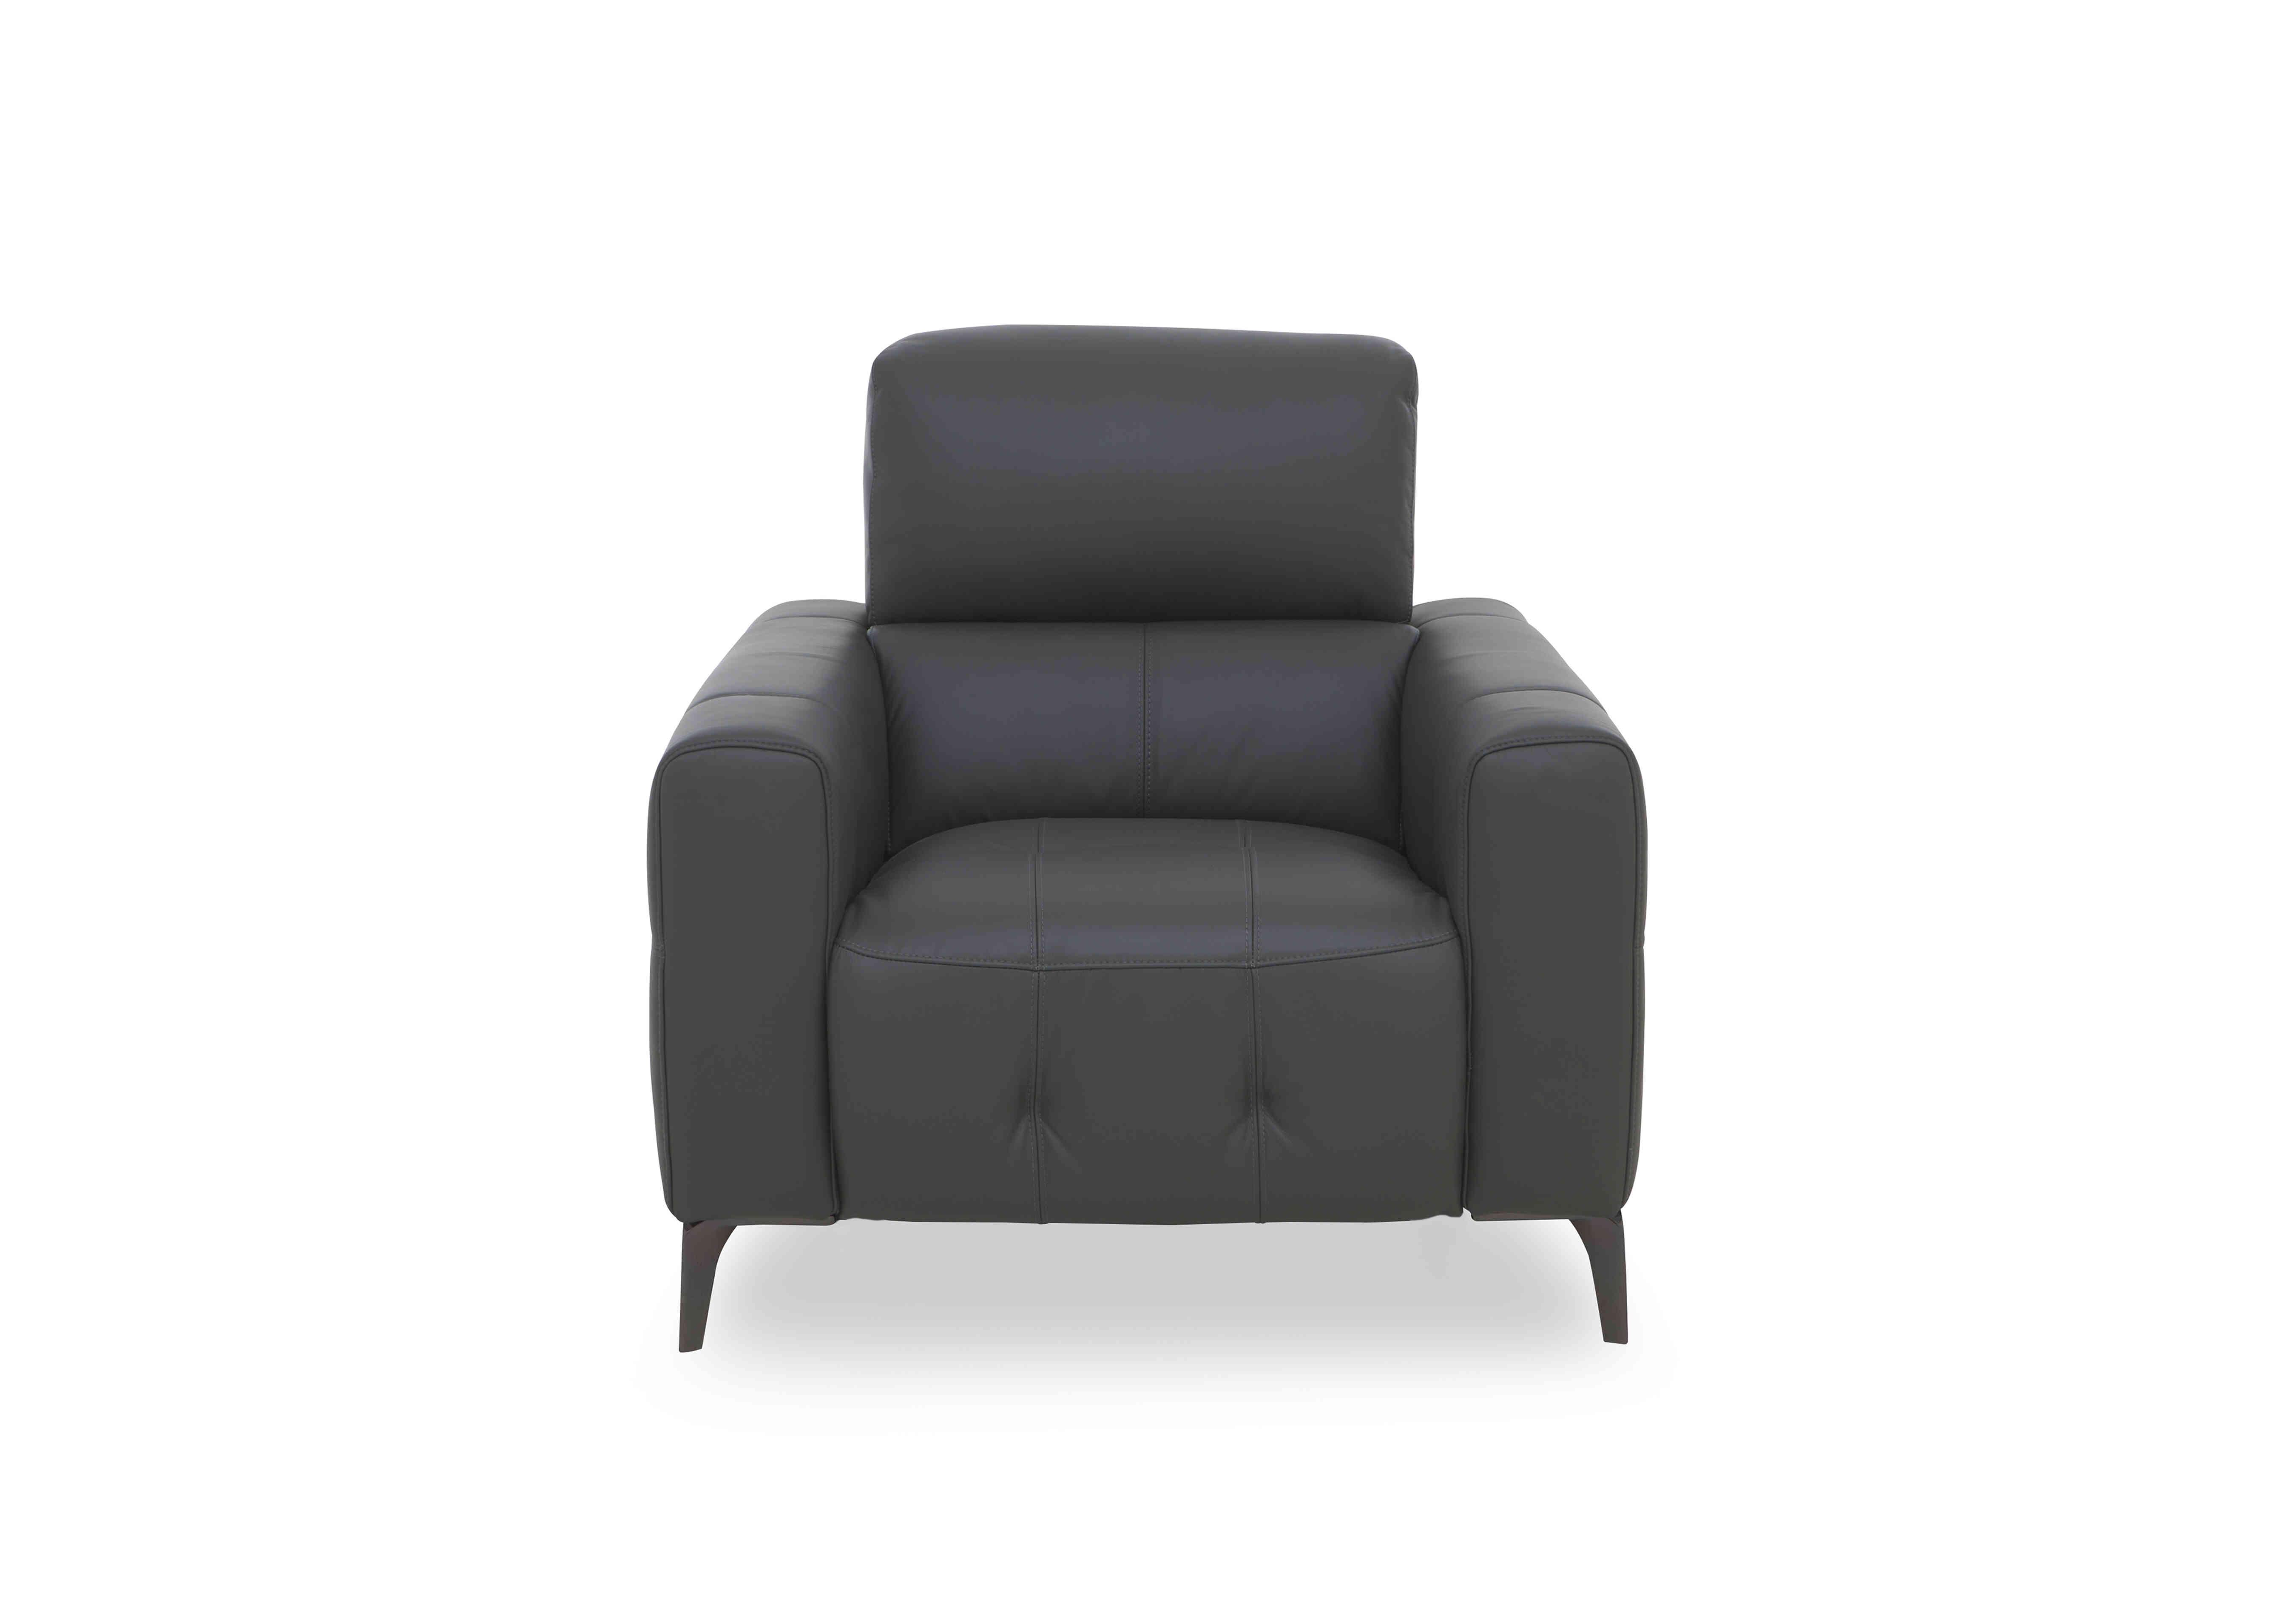 New York Leather Chair in Nw-517e Shale Grey on Furniture Village